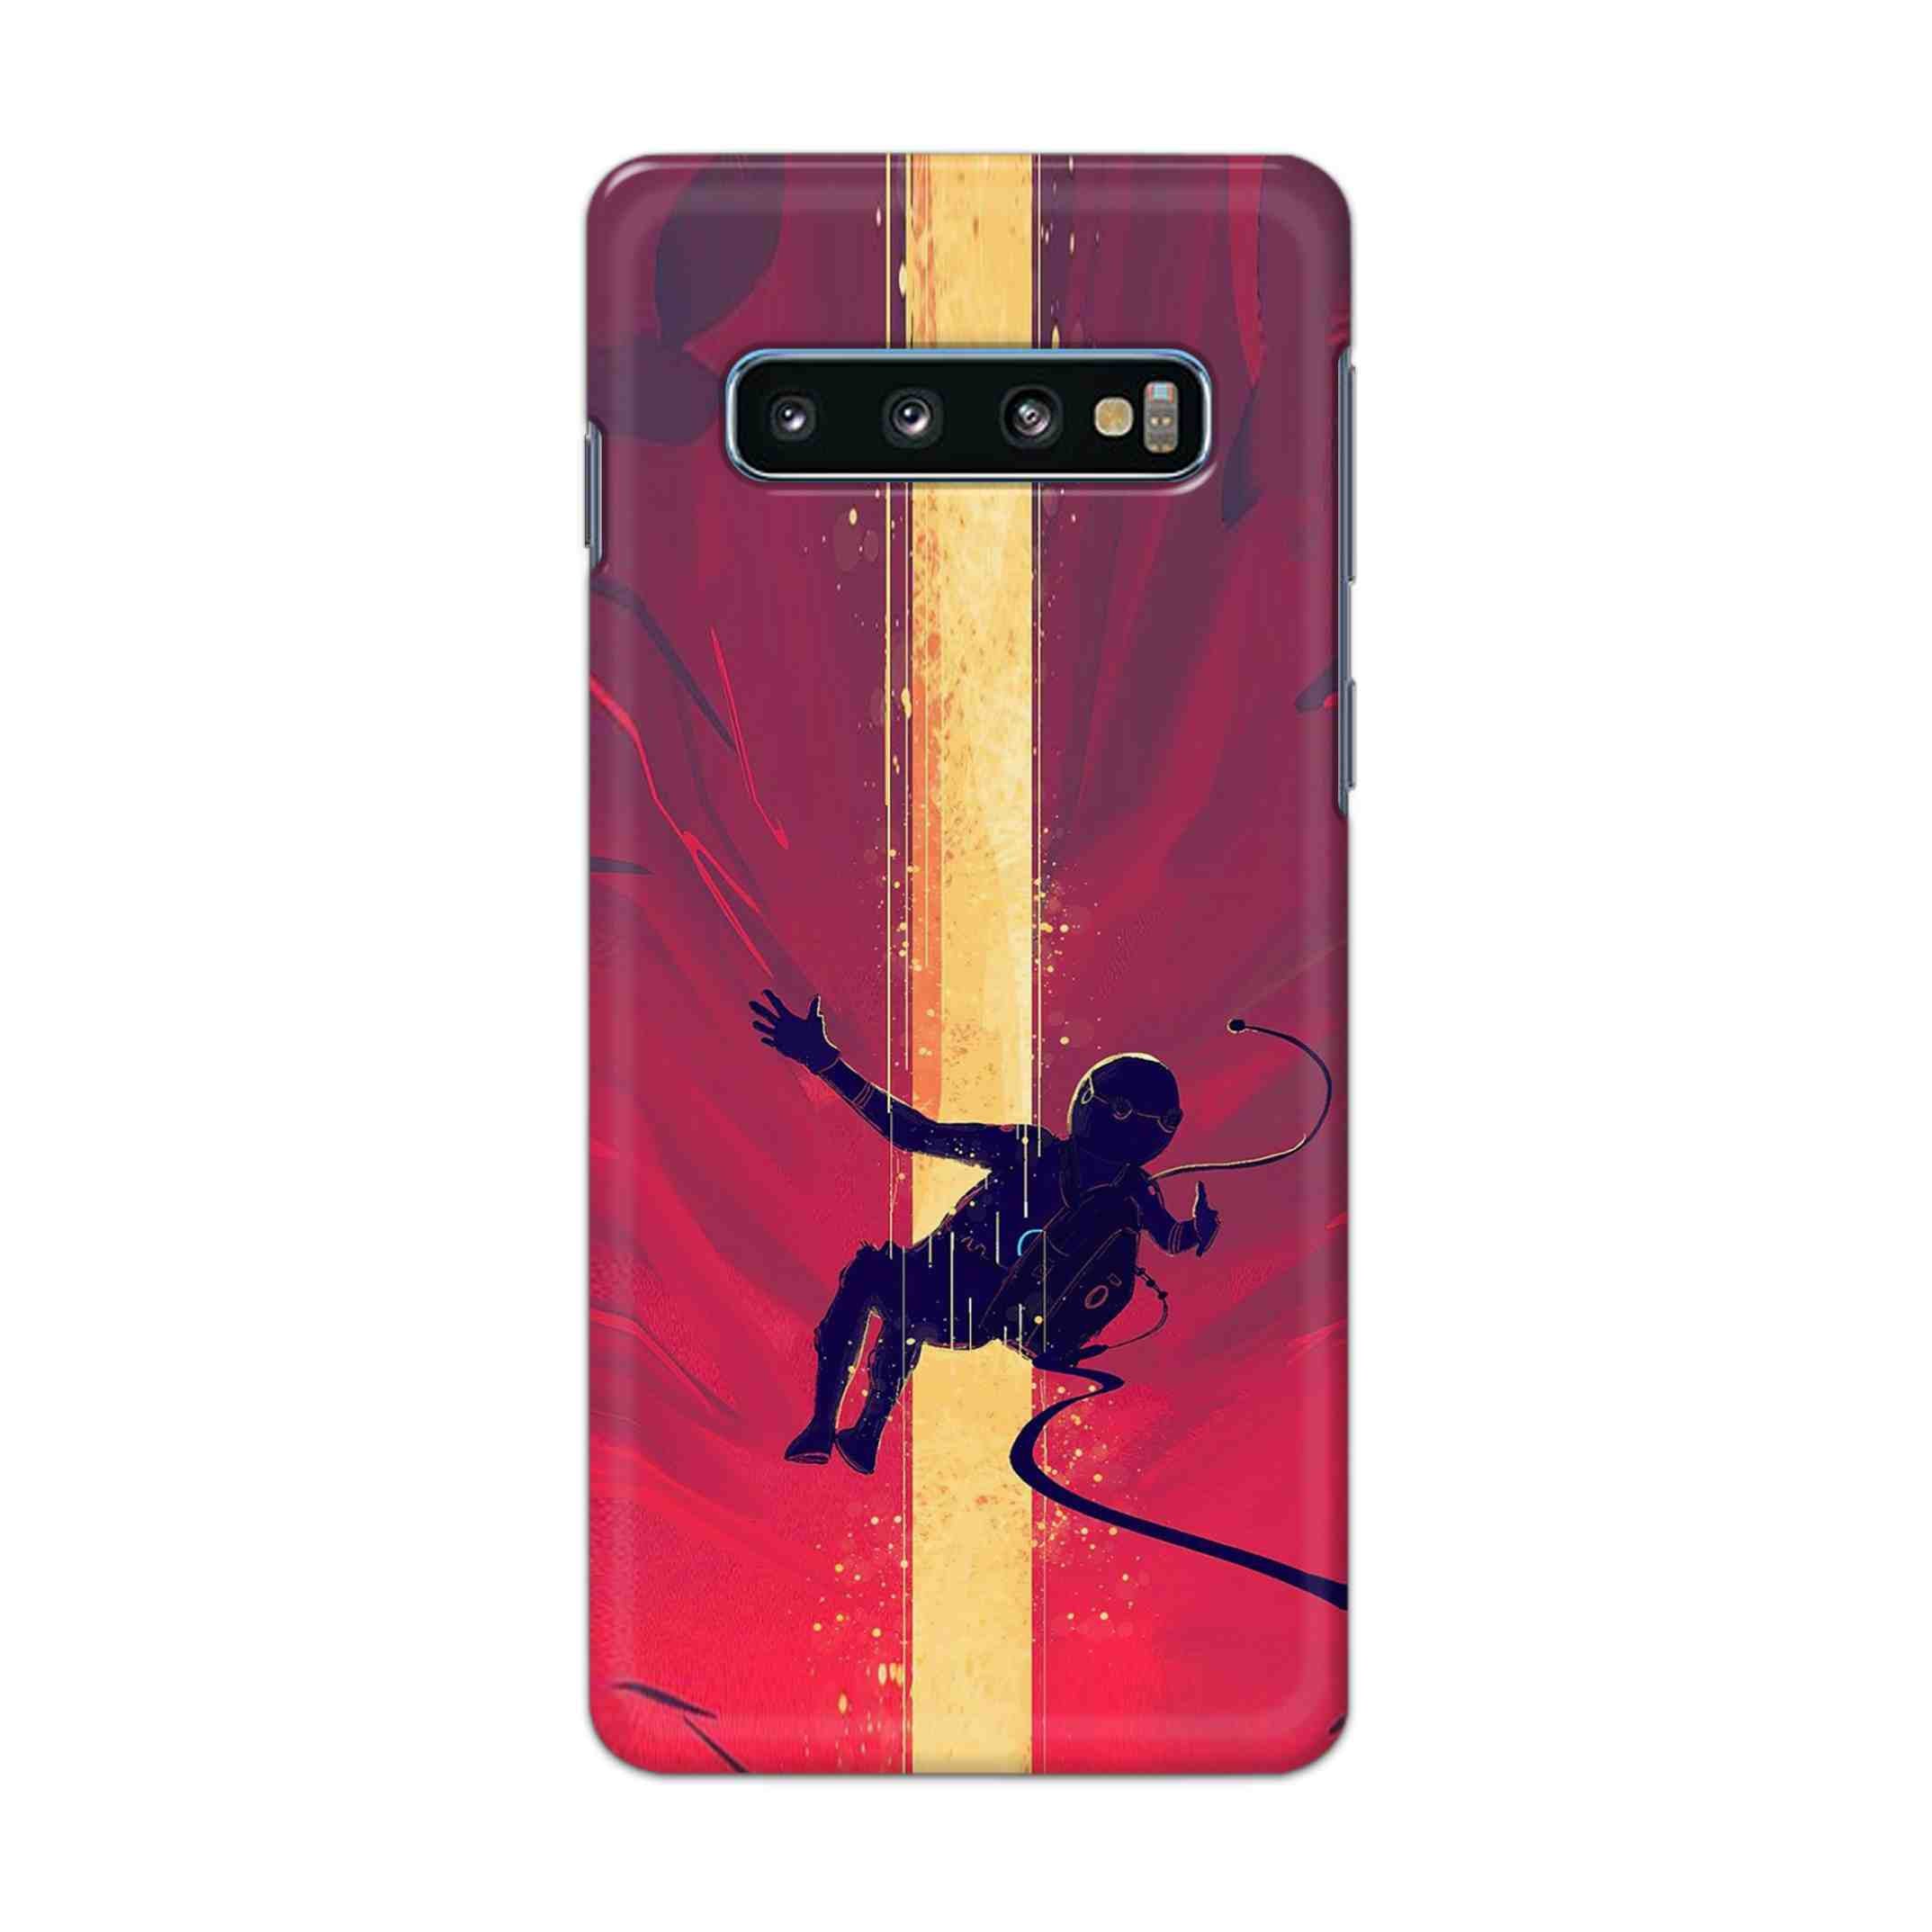 Buy Astronaut In Air Hard Back Mobile Phone Case Cover For Samsung Galaxy S10 Plus Online